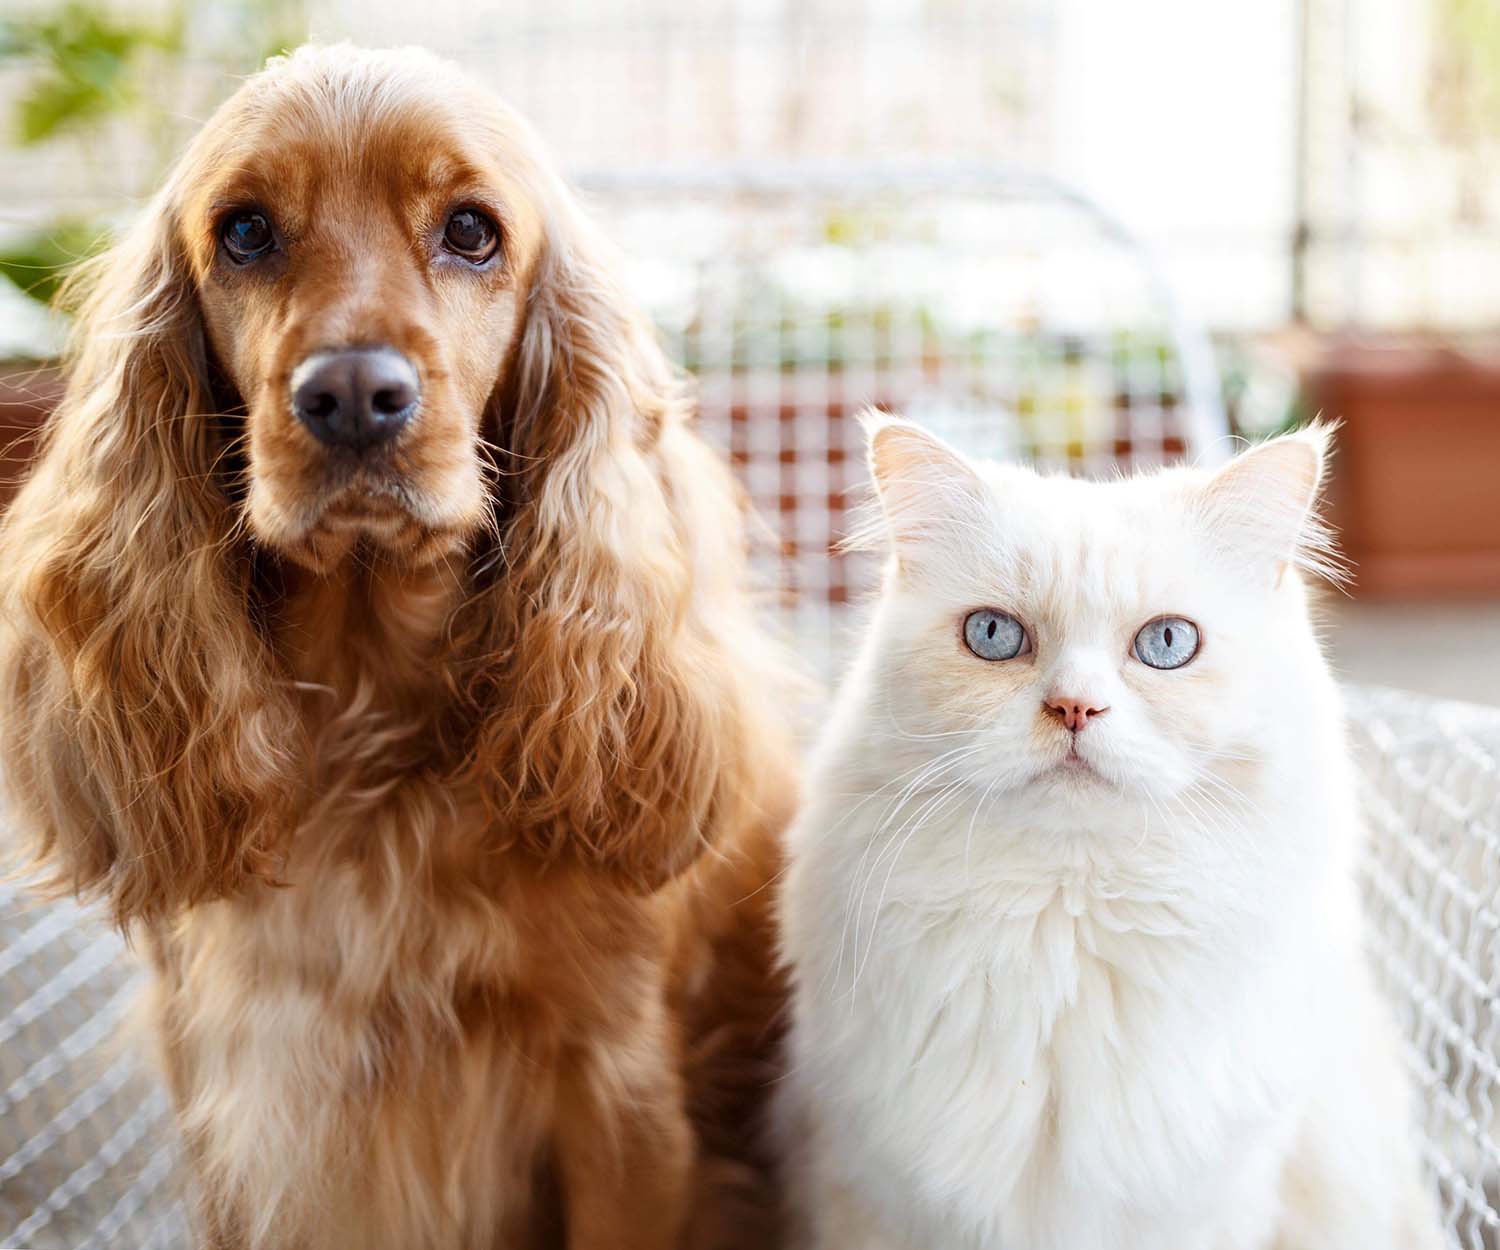 caring for elderly pets